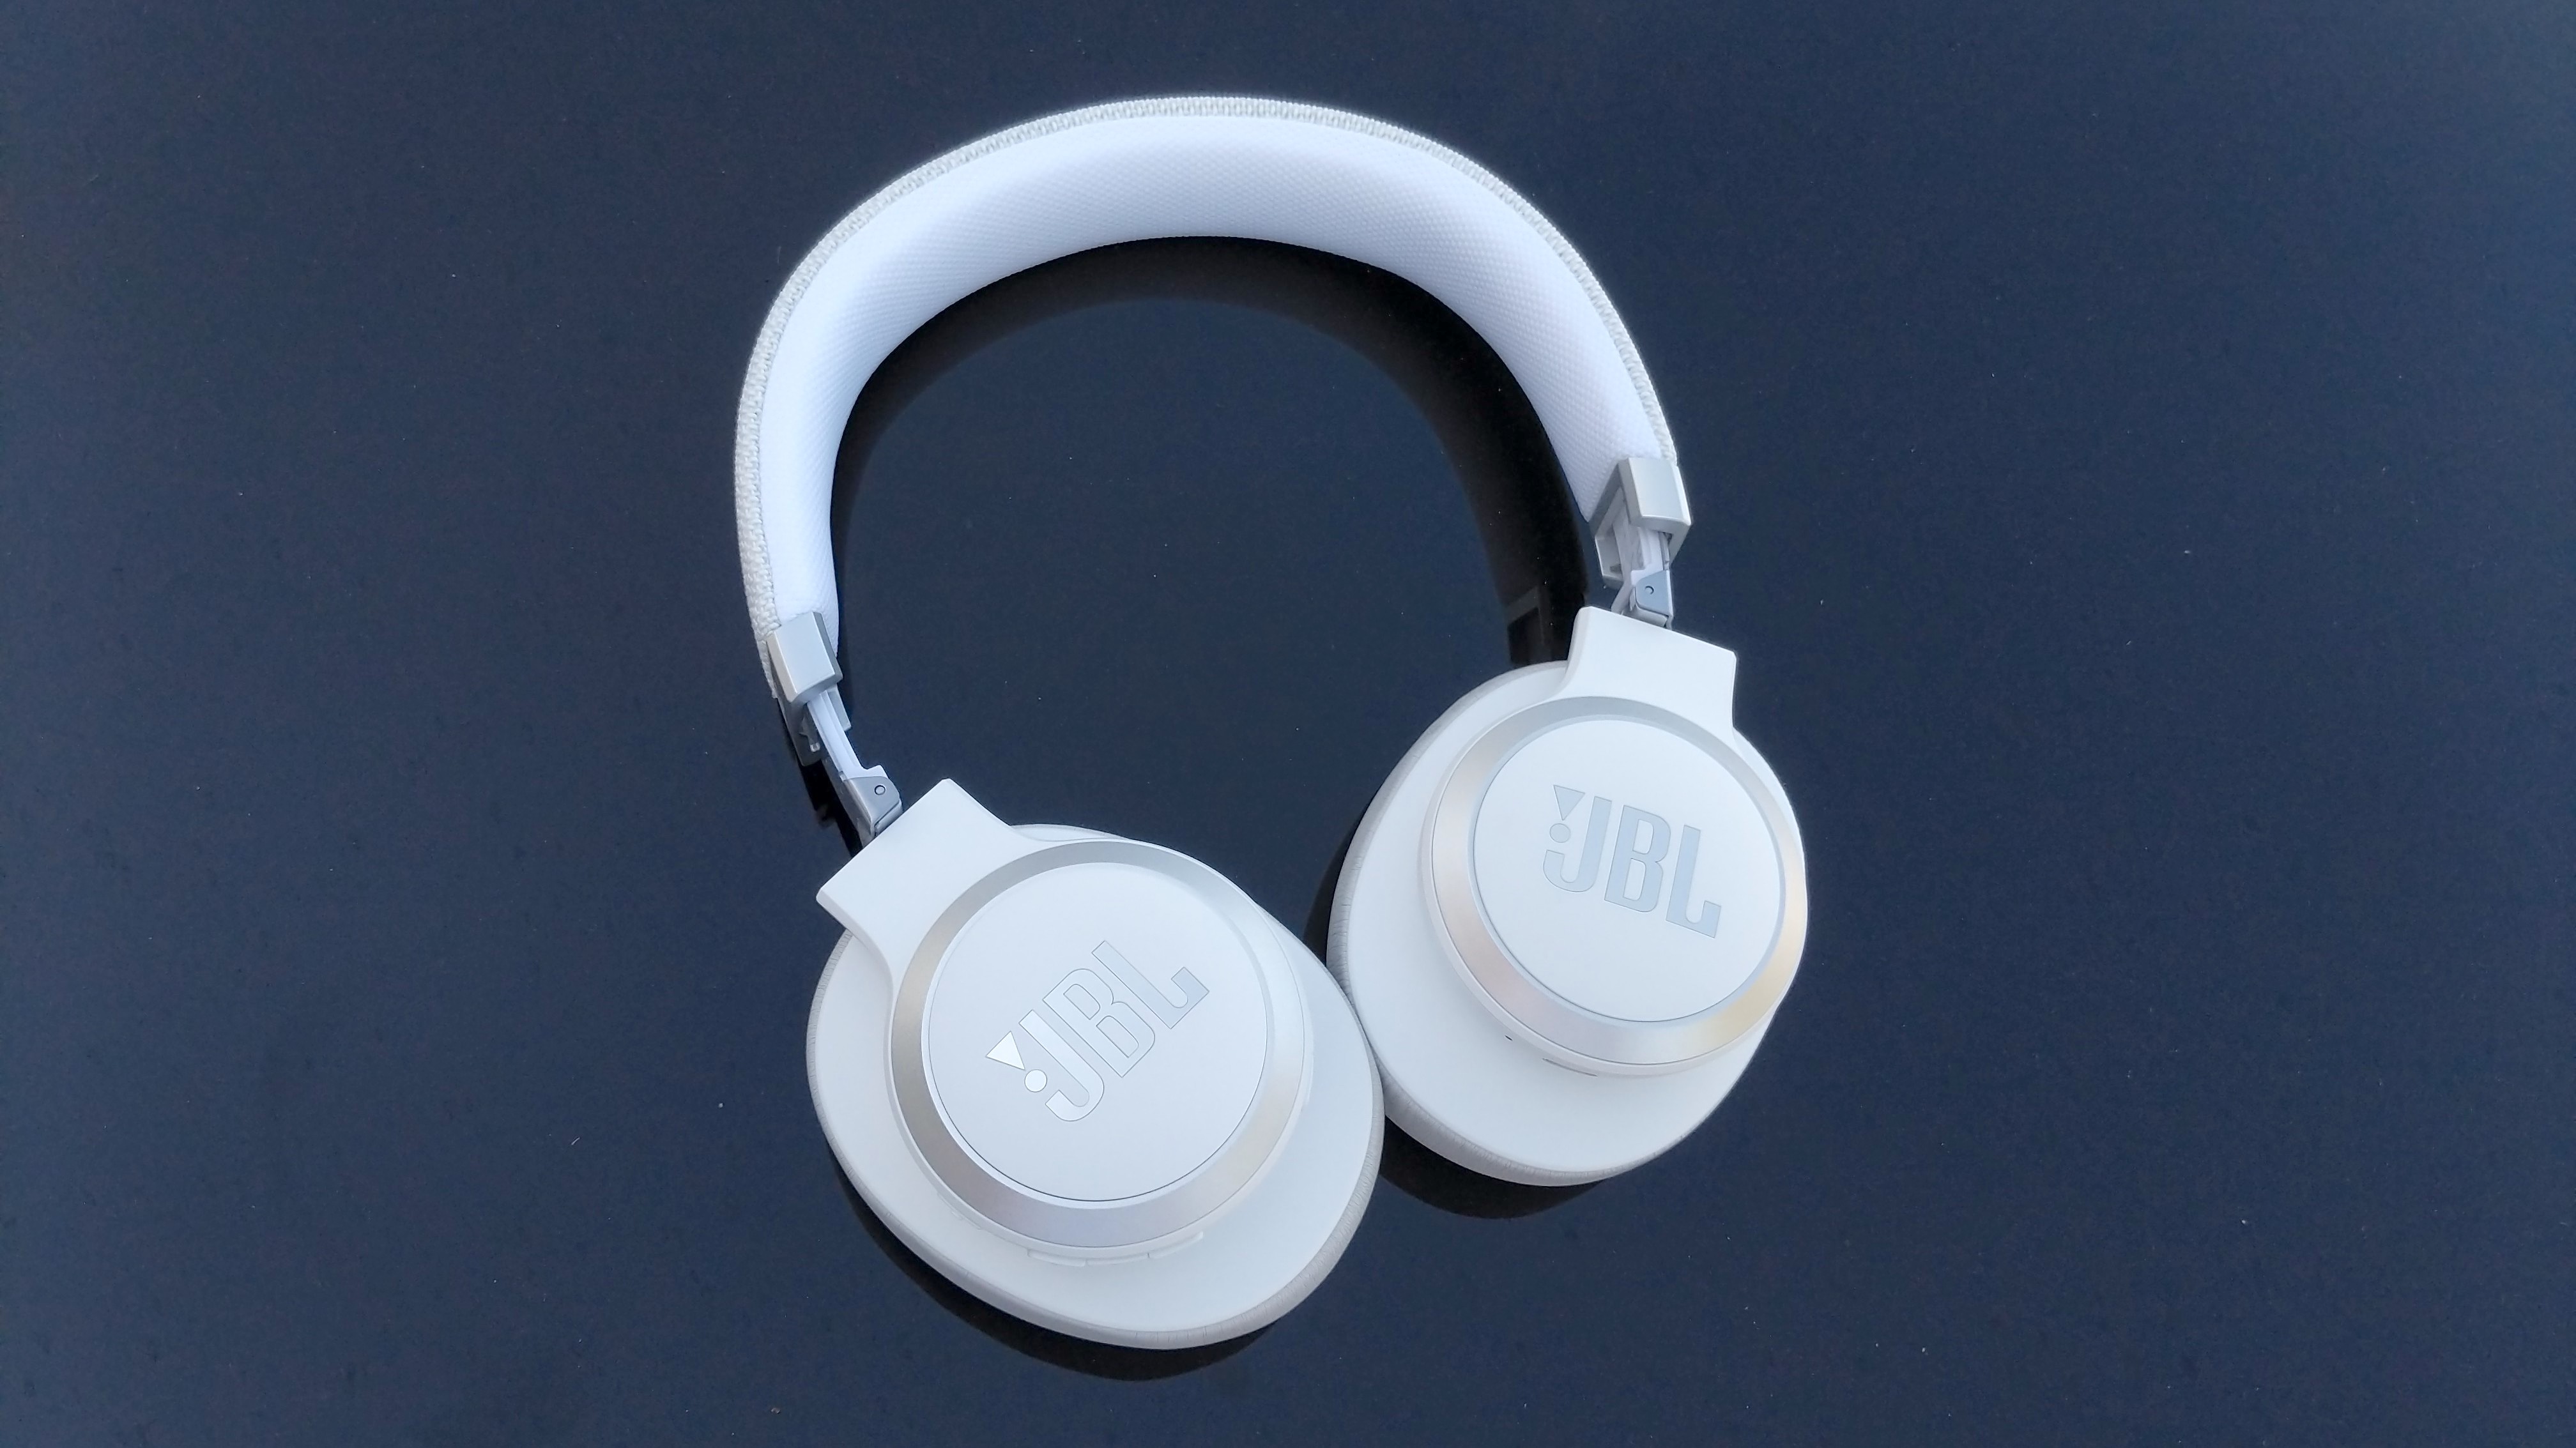 JBL Live 660NC - Wireless Over-Ear Noise Cancelling Headphones with Long  Lasting Battery and Voice Assistant - Black, Medium